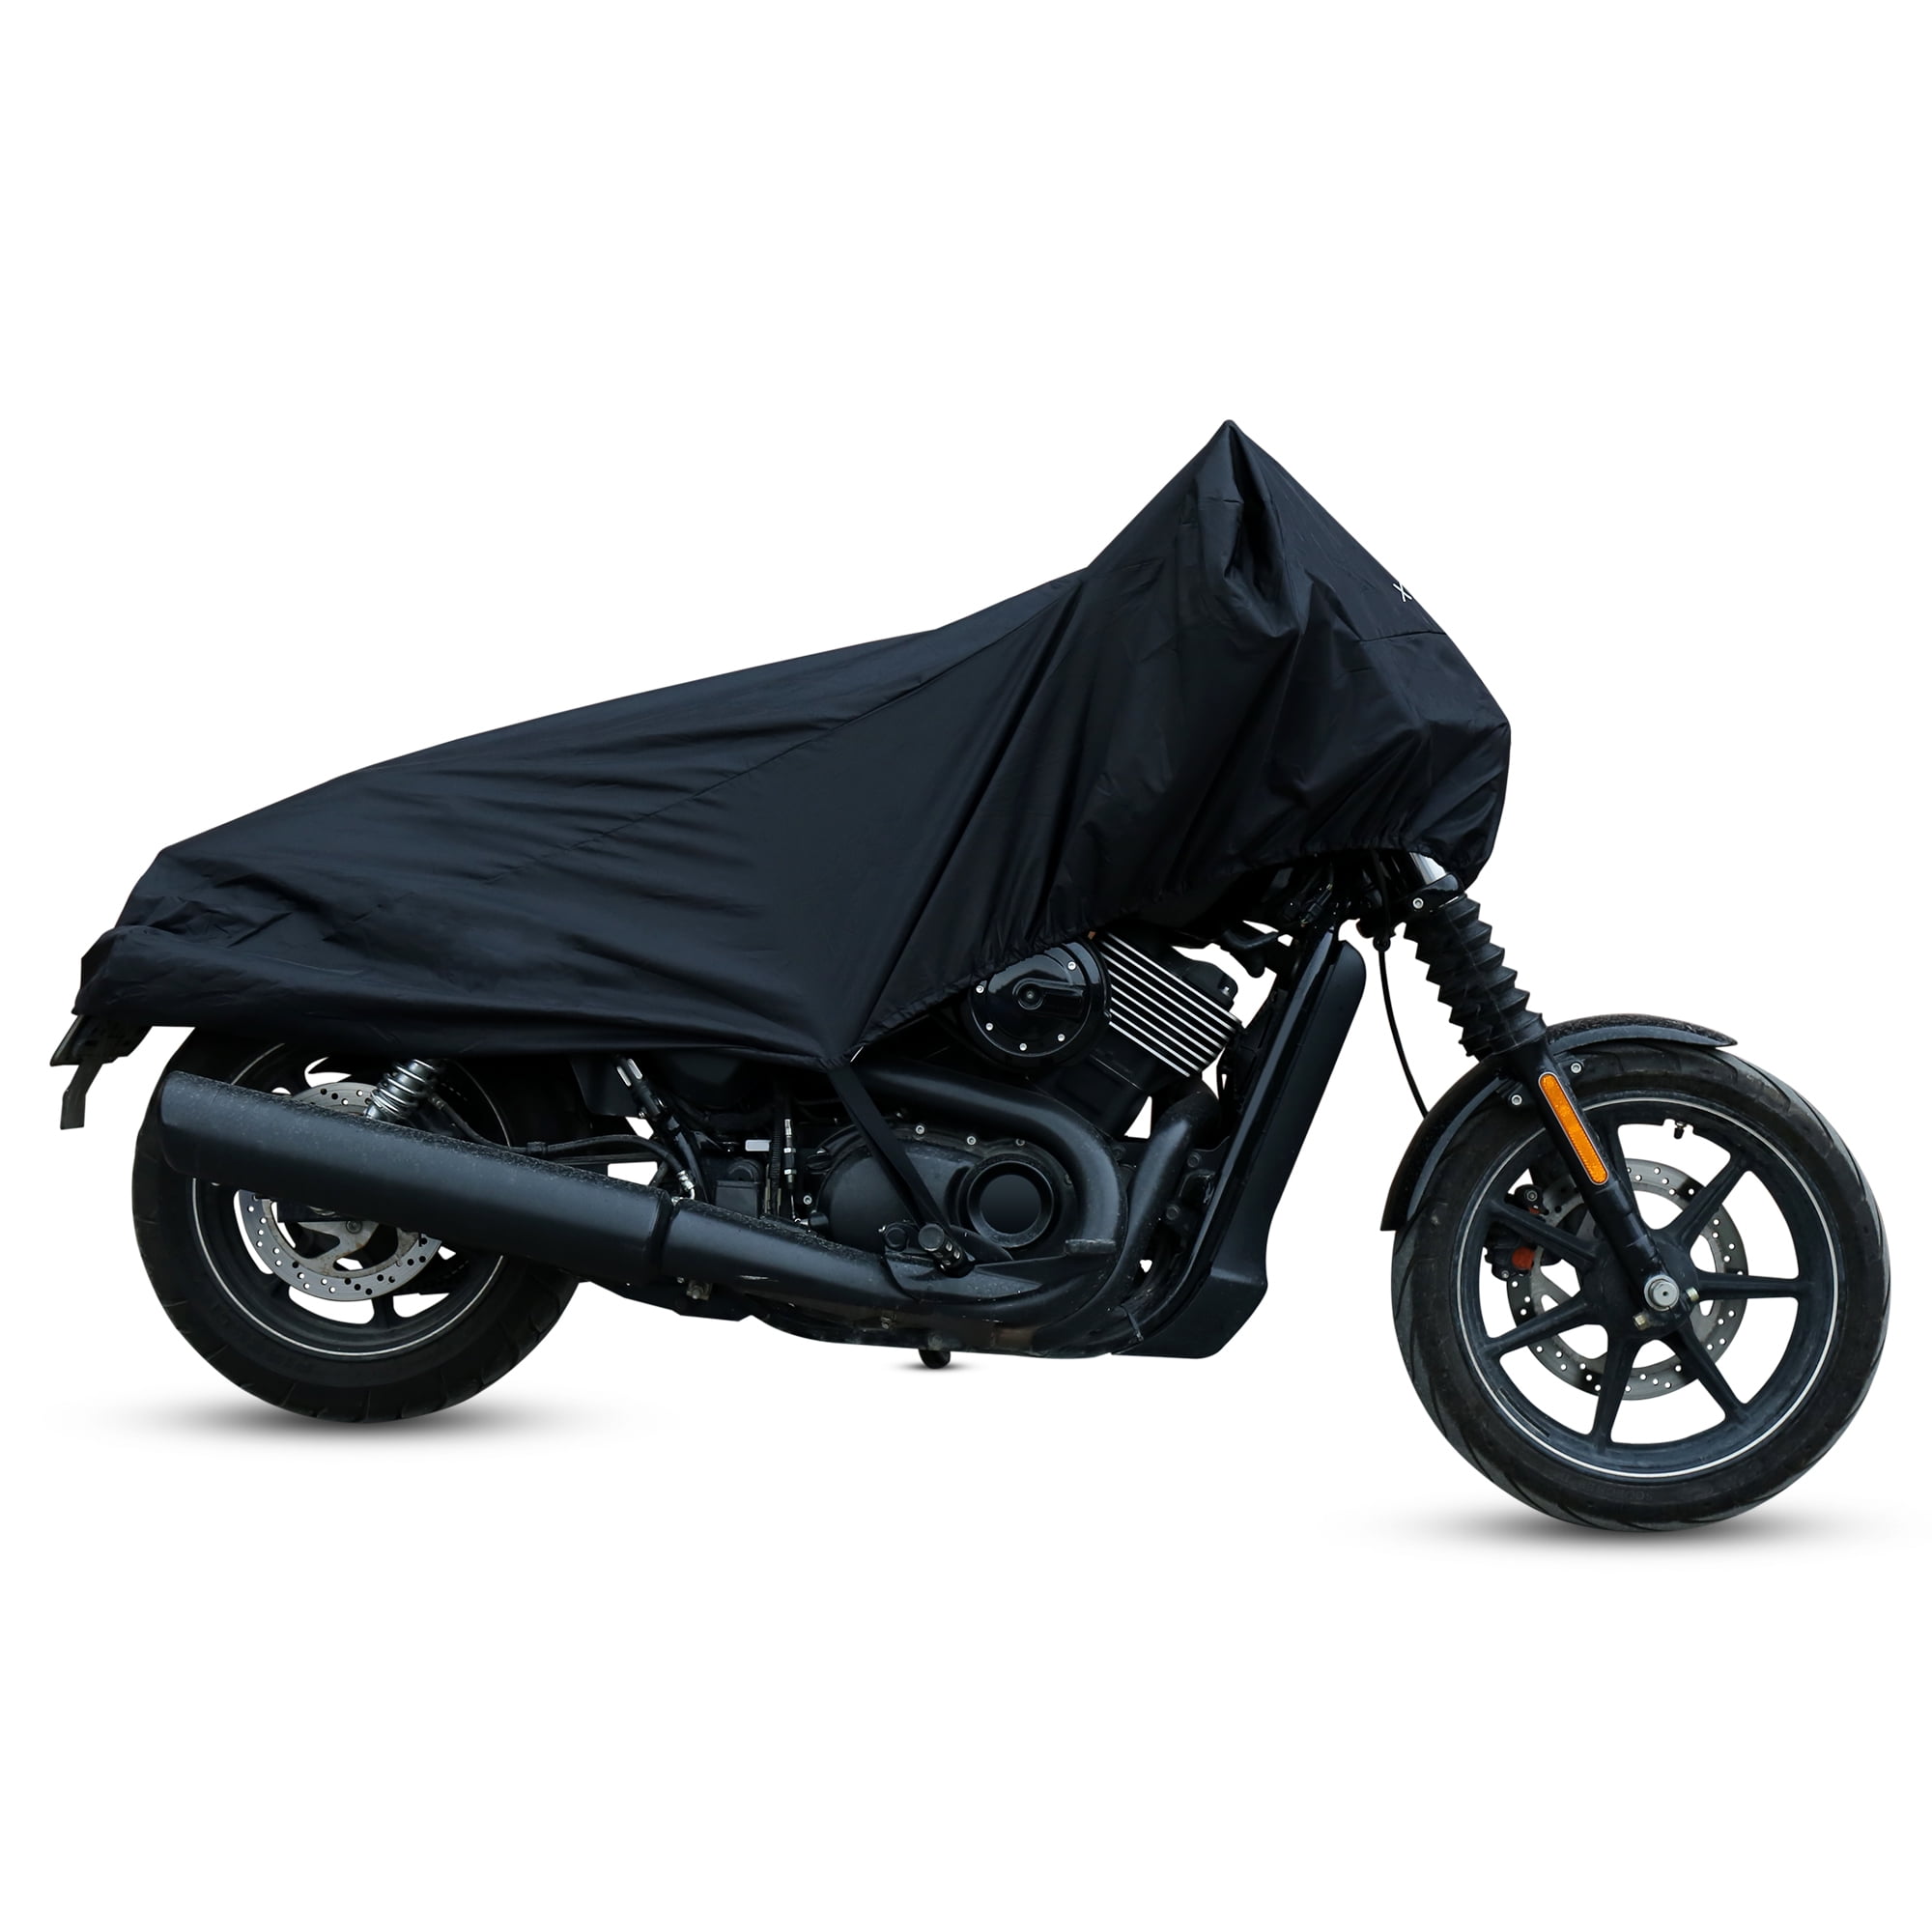 XXL Waterproof Motorcycle Cover For Harley Davidson Dyna Softail Iron XL 883 US